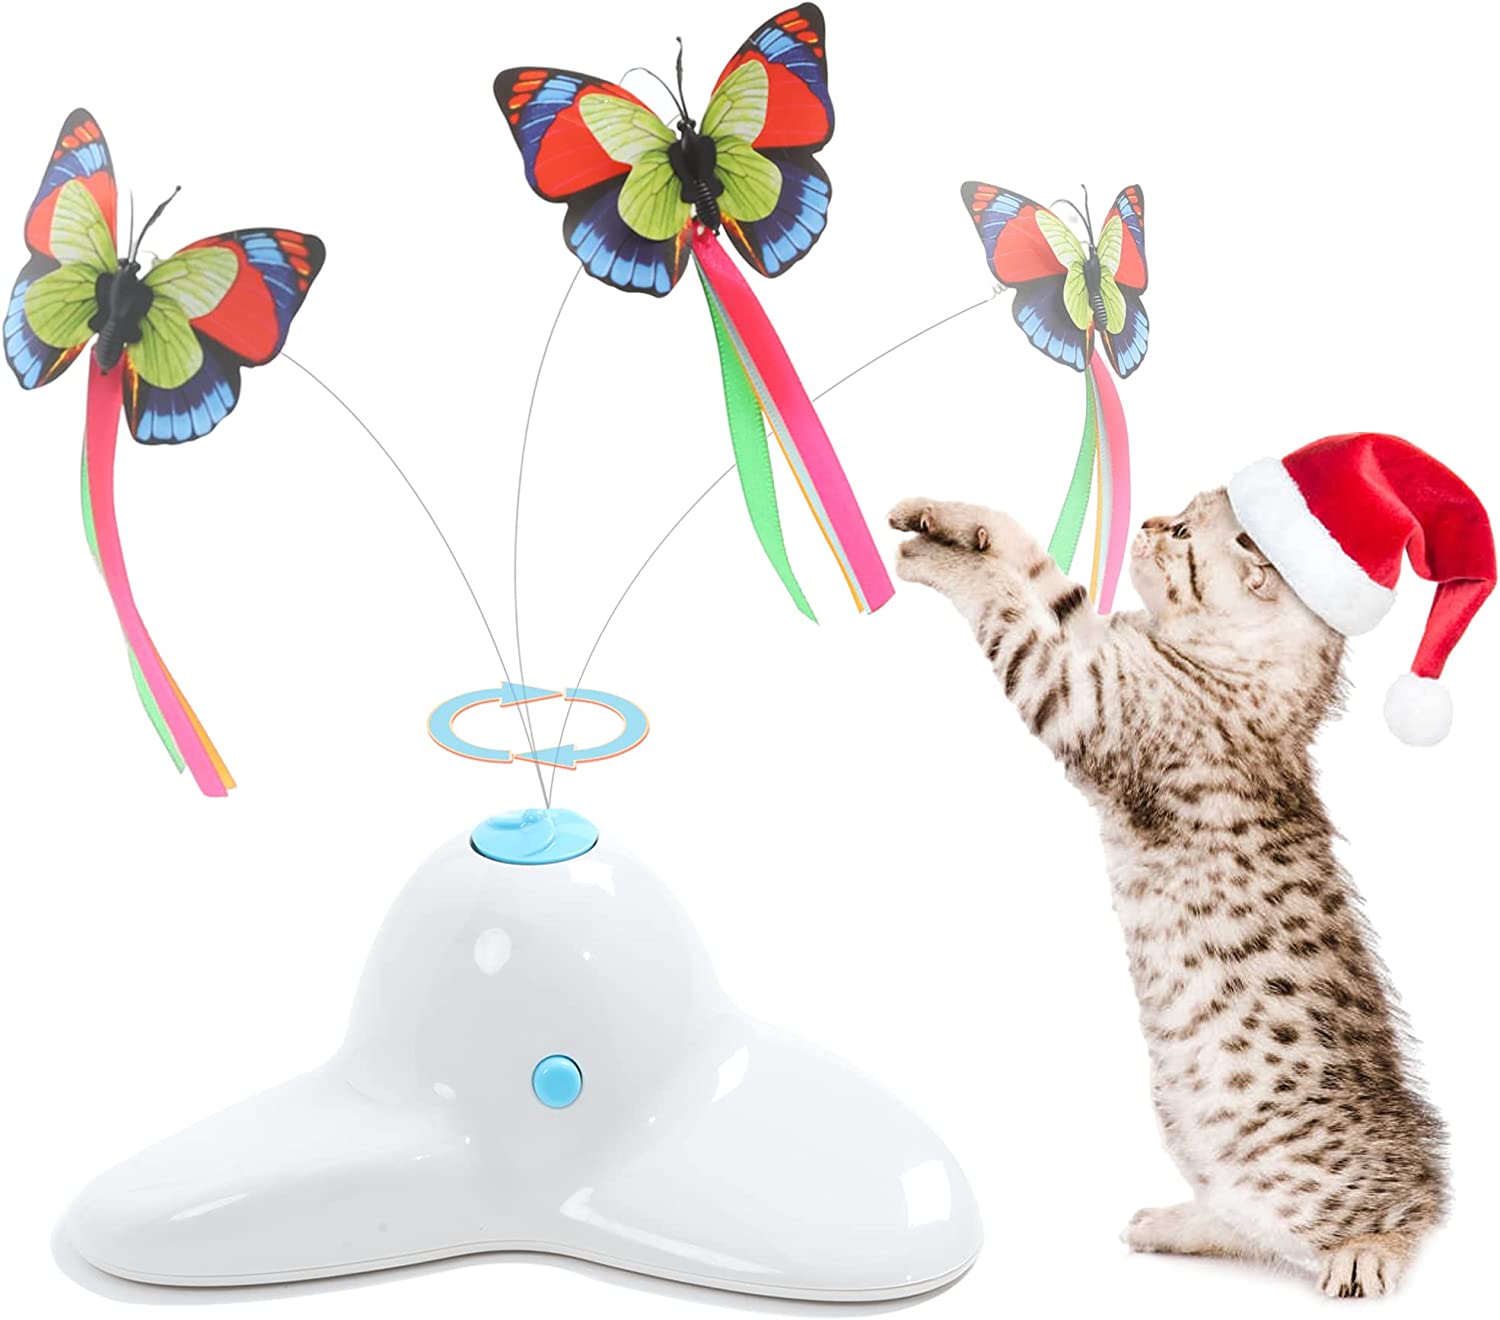 Eletise Rotating Butterfly Teaser Stick Cat Interactive Meataalo